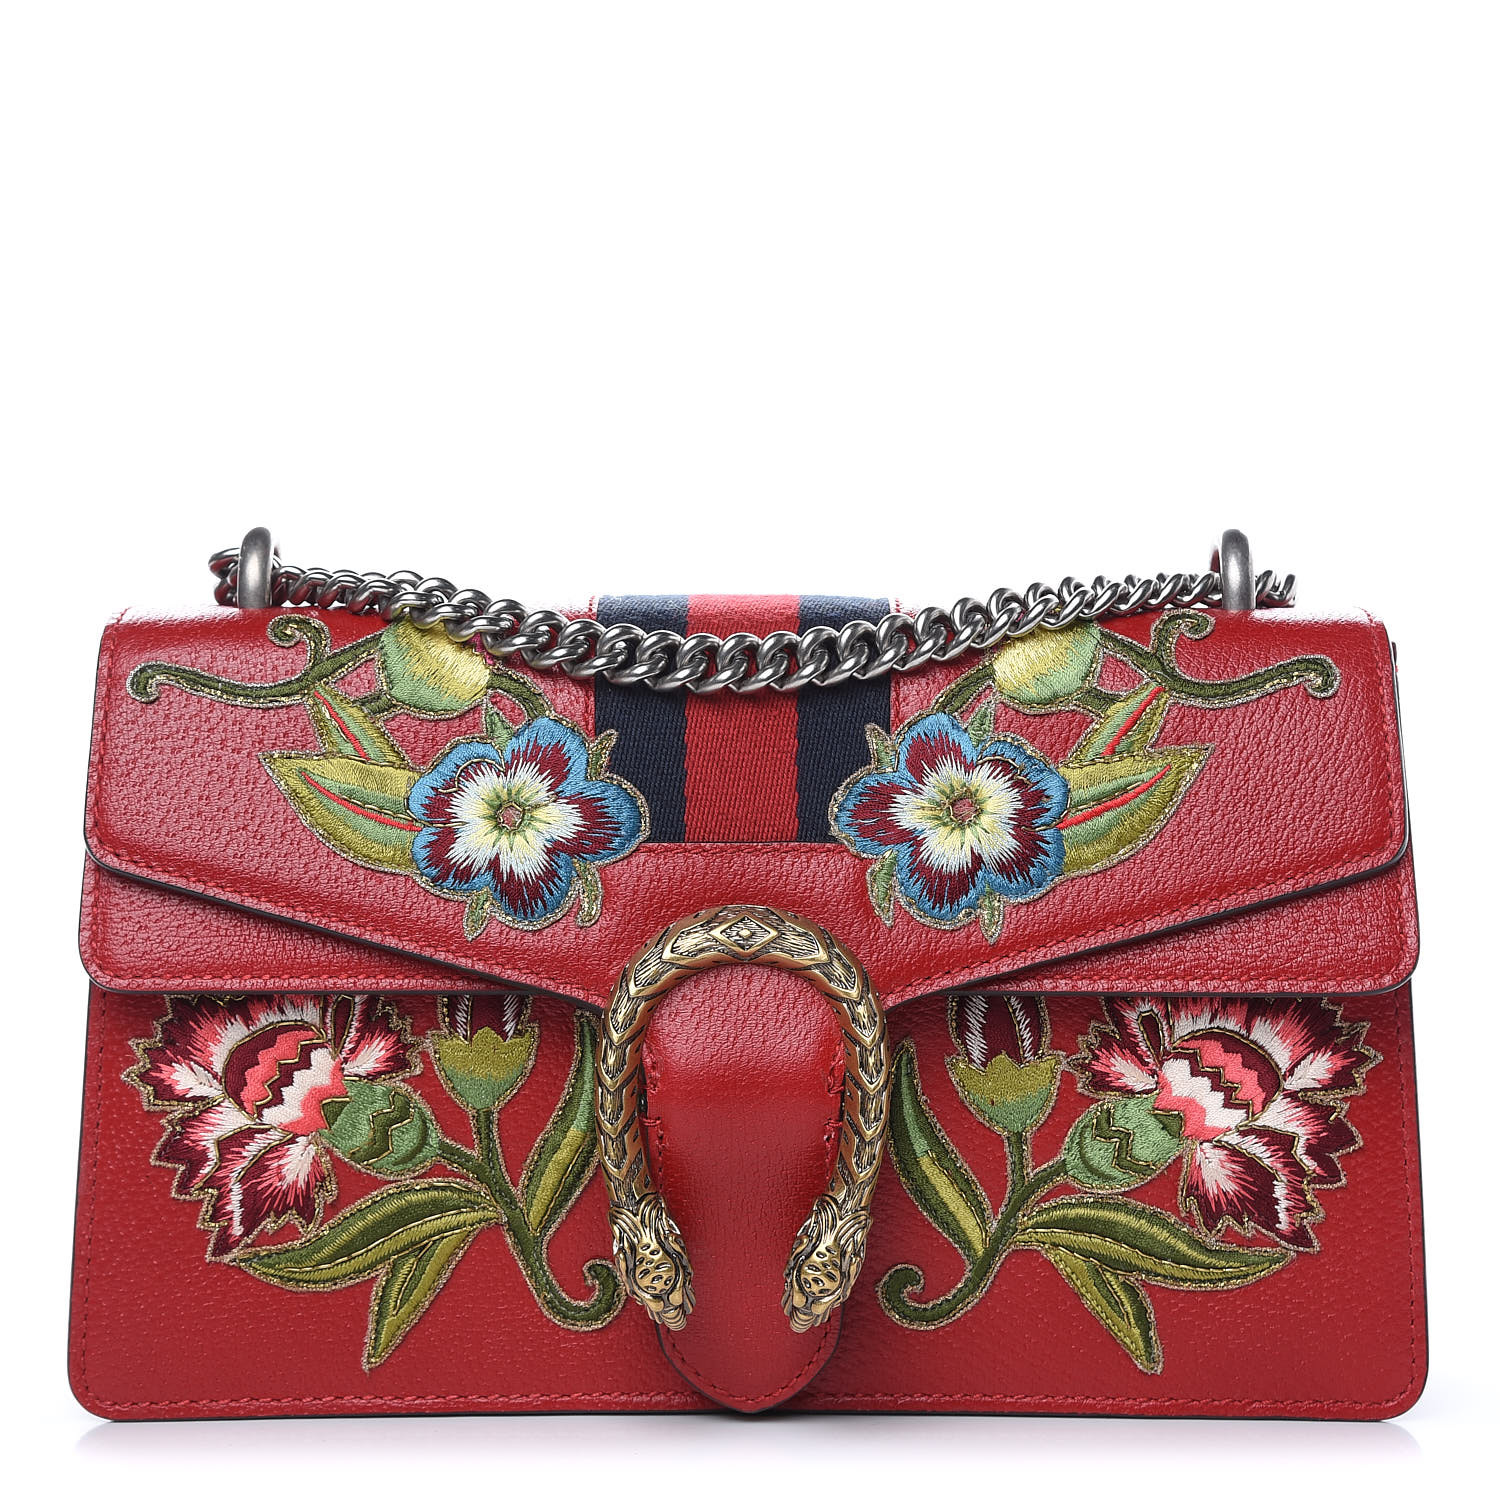 GUCCI Calfskin Small Dionysus Web Floral Embroidered Shoulder Bag Hibiscus Red 400399